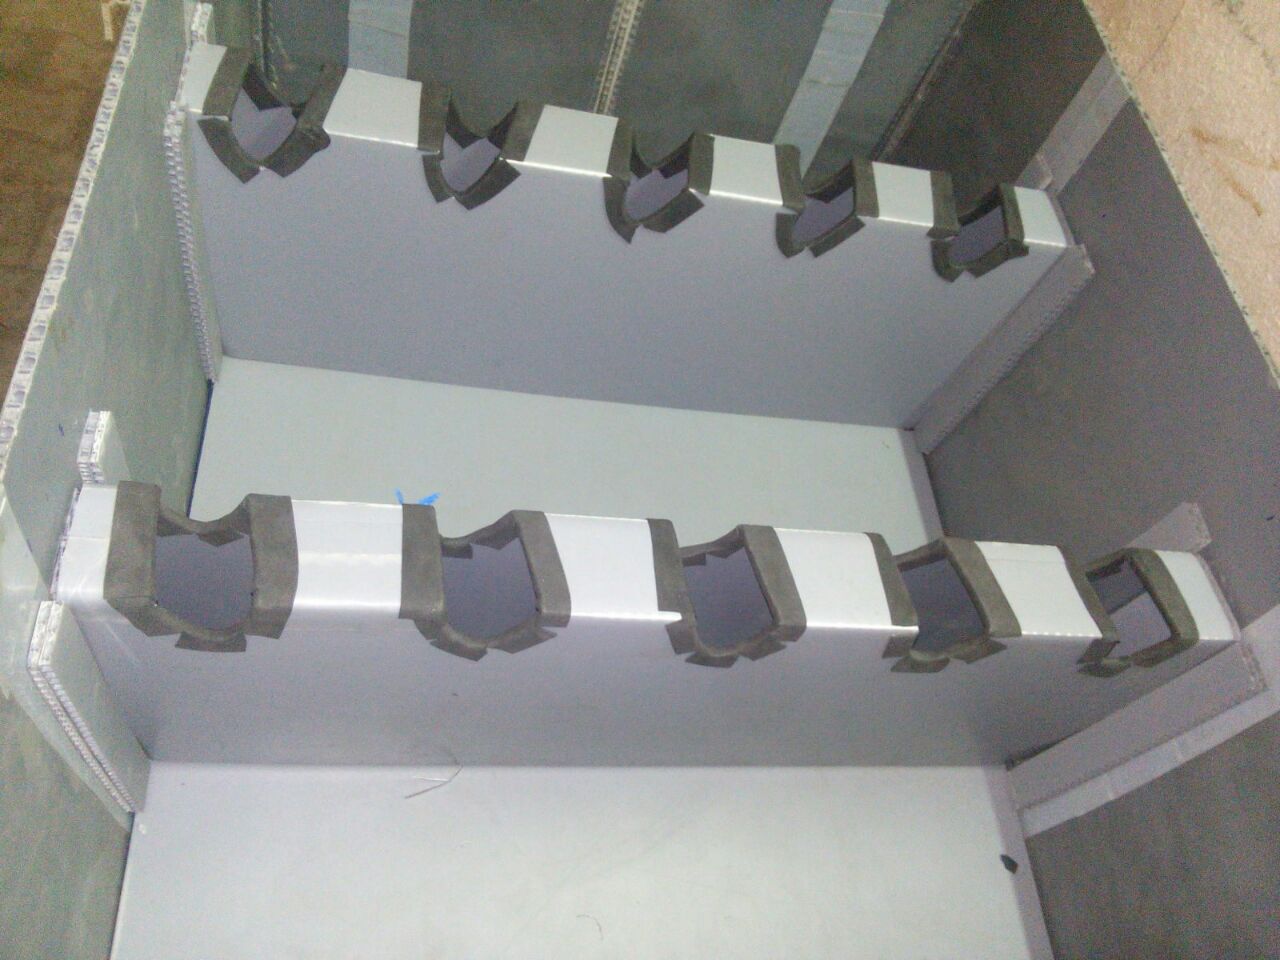 PP Corrugated Boxes